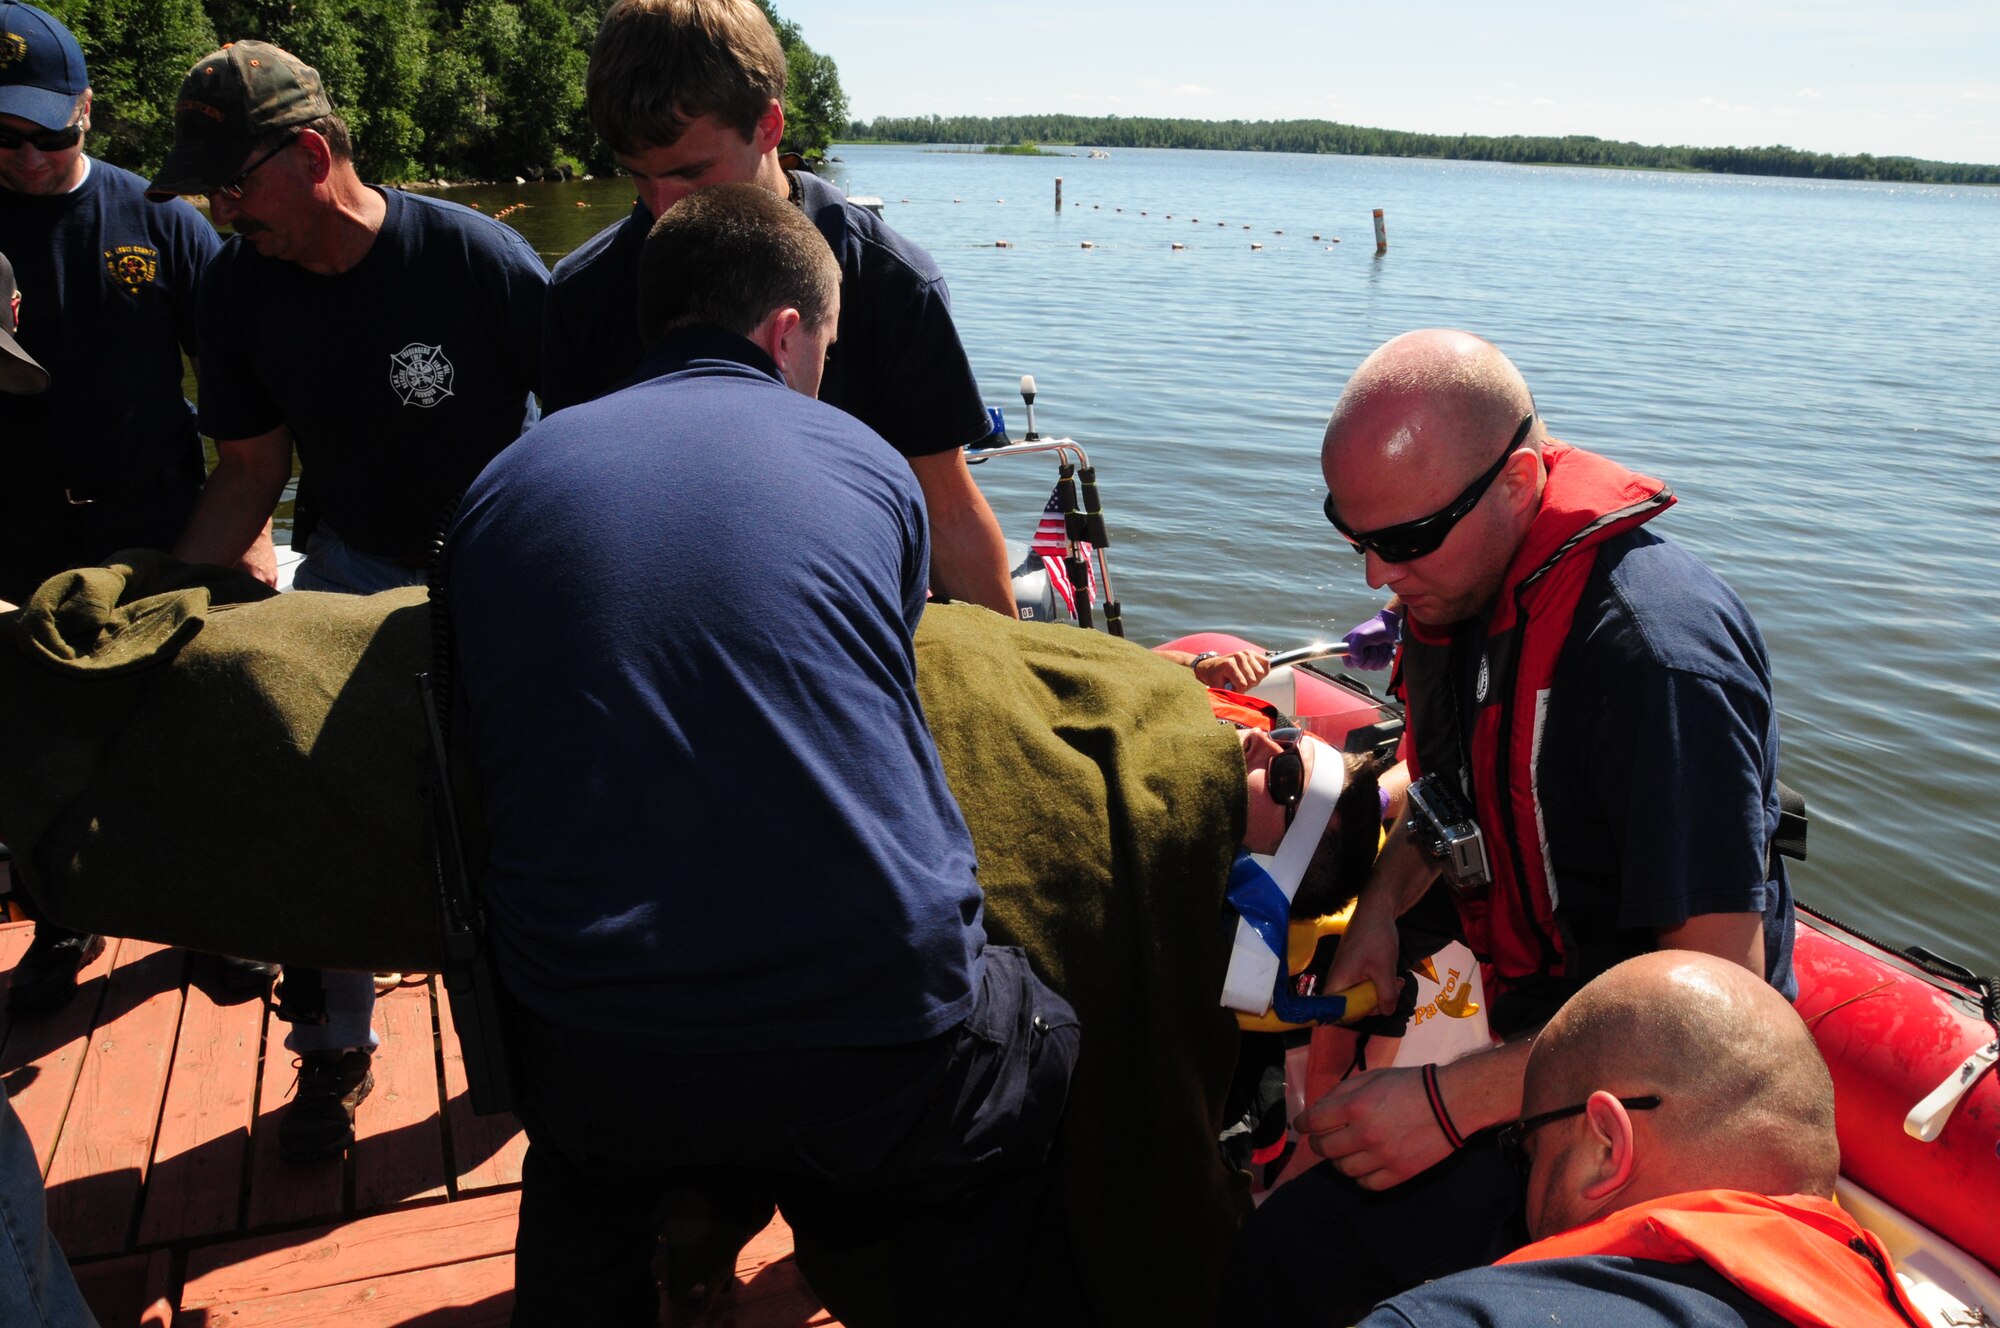 Members of the St. Louis County Rescue Squad and Fredenberg Rescue Squad lift the recovered 148th Fighter Wing pilot safely to shore after transport across Fish Lake July 11, 2011.  Throughout the pilot's ride across the lake, members of the St. Louis County Rescue Squad simulated medical treatment and coordinated with their counterparts back on shore.  (U.S. Air Force photo by Tech. Sgt. Scott G. Herrington)